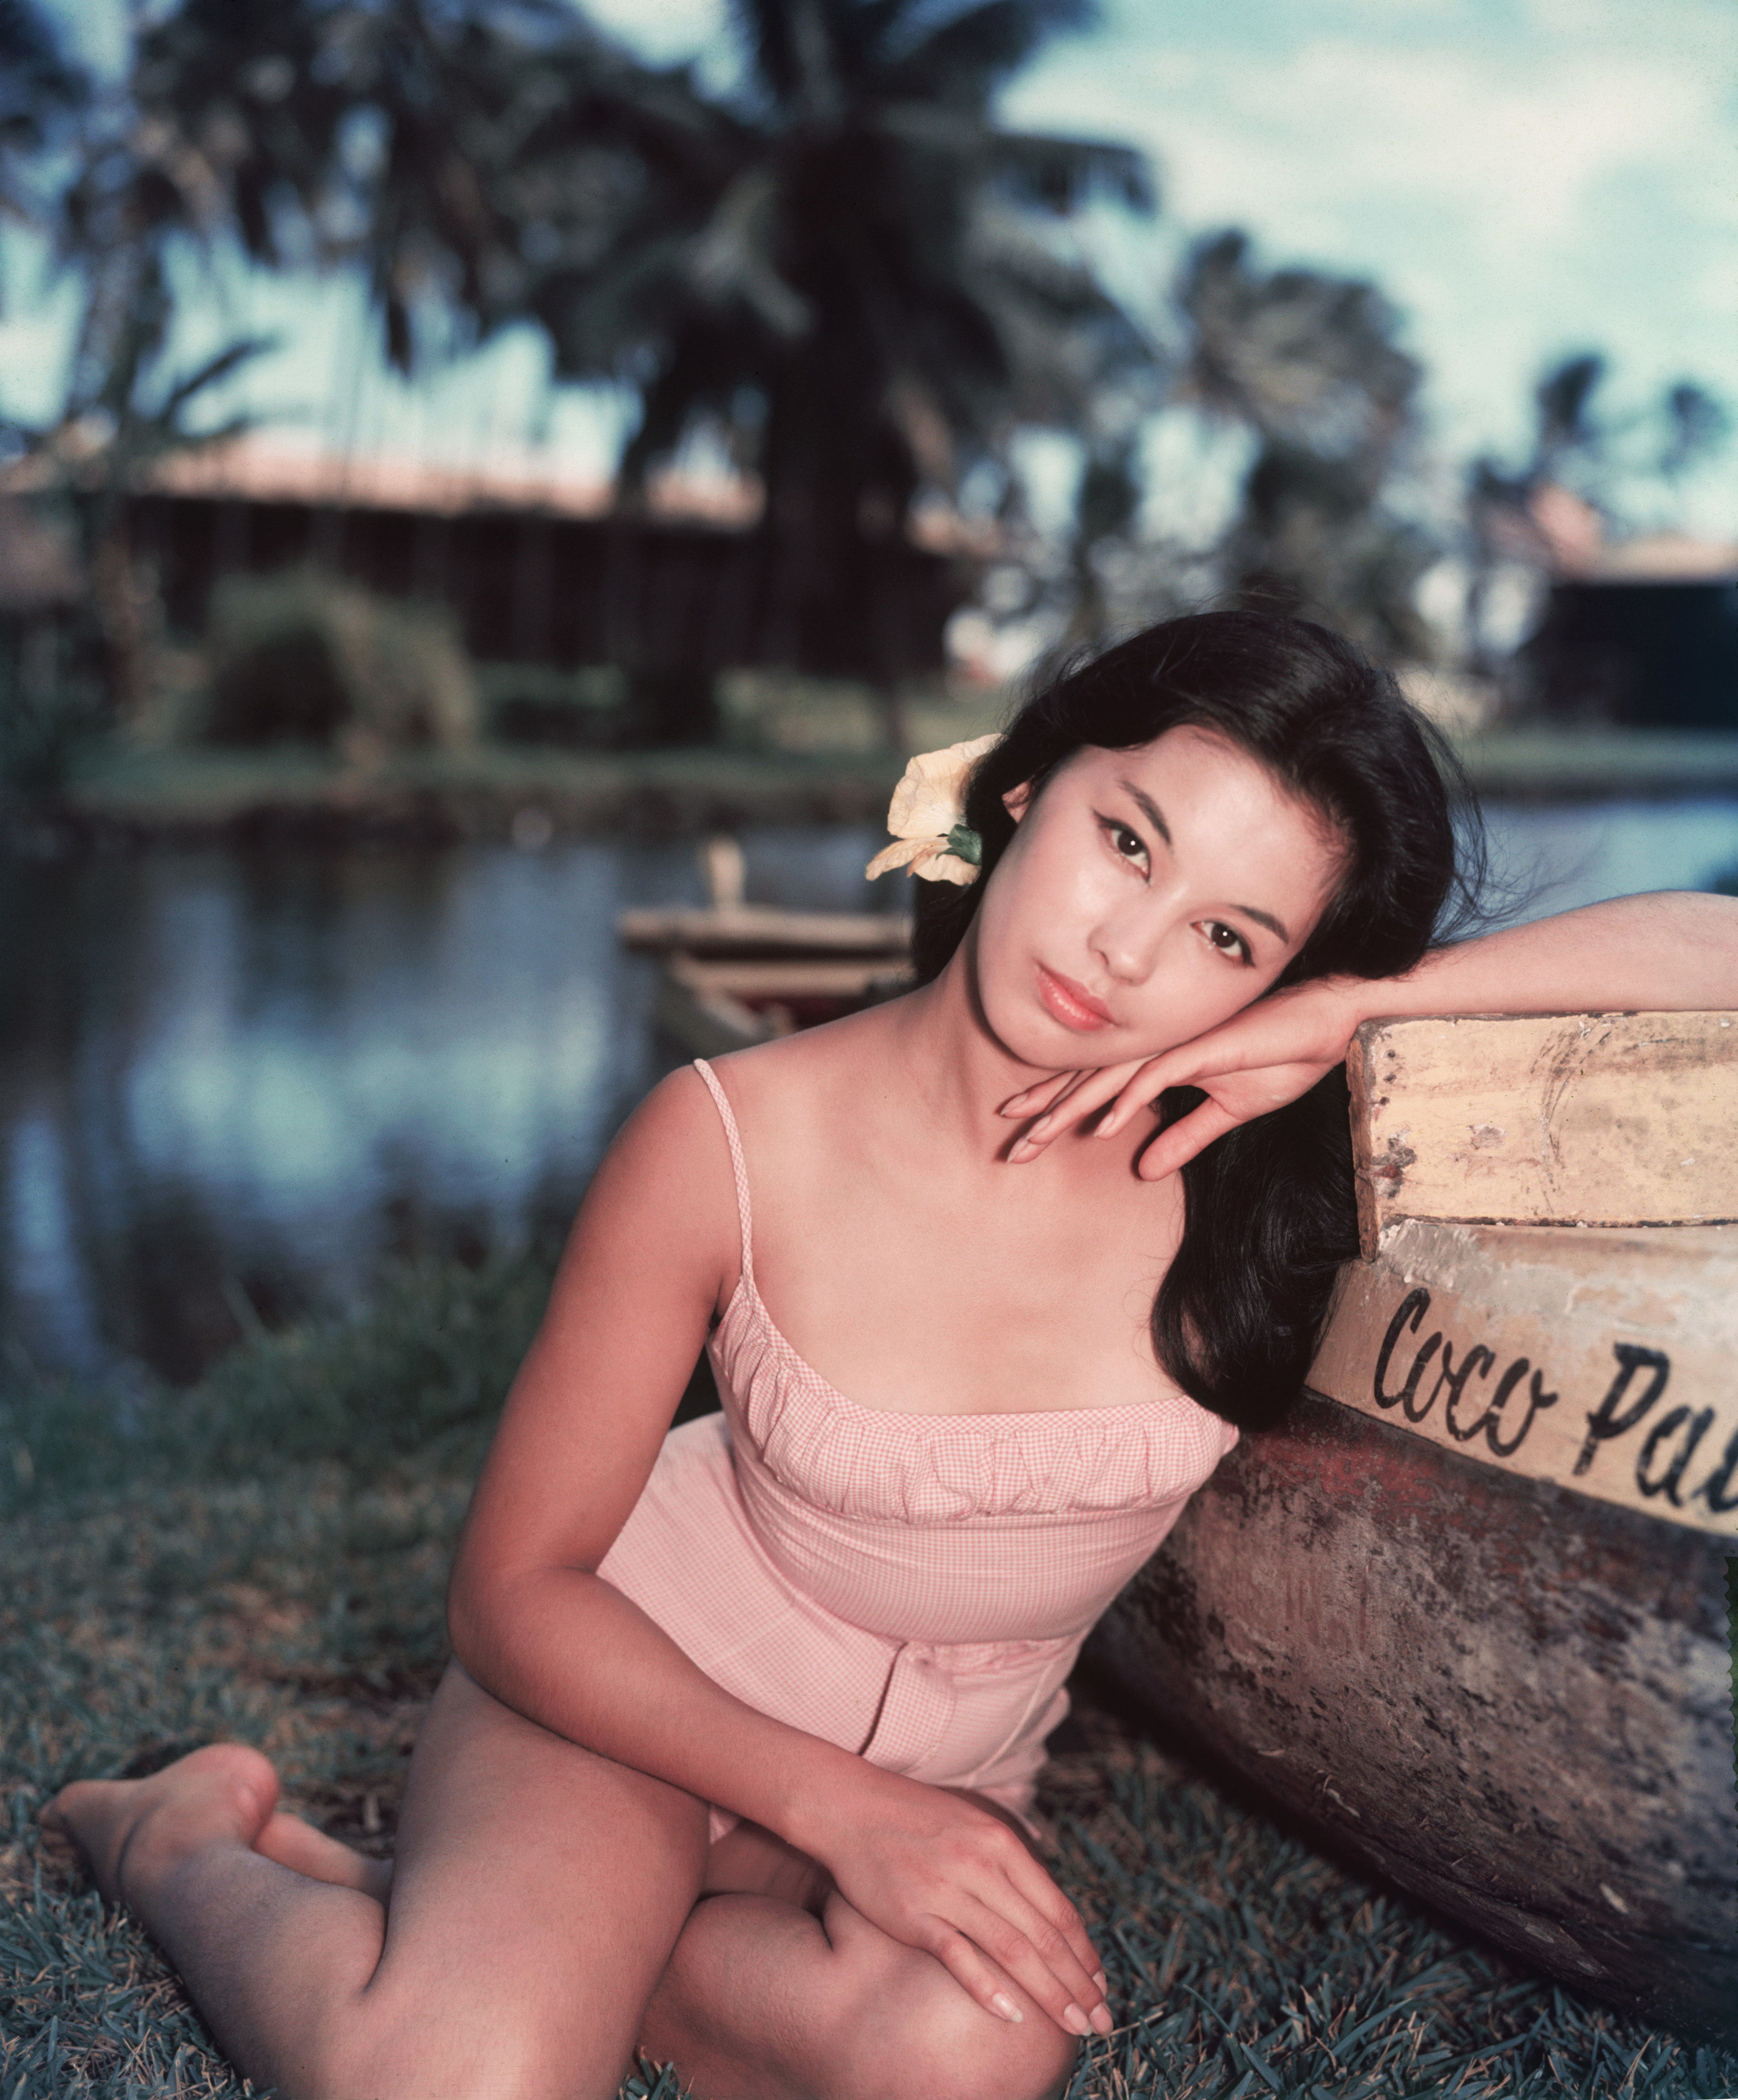 Vietnamese-French actress France Nuyen during a break in filming &#x27;South Pacific&#x27;, in which she plays Liat